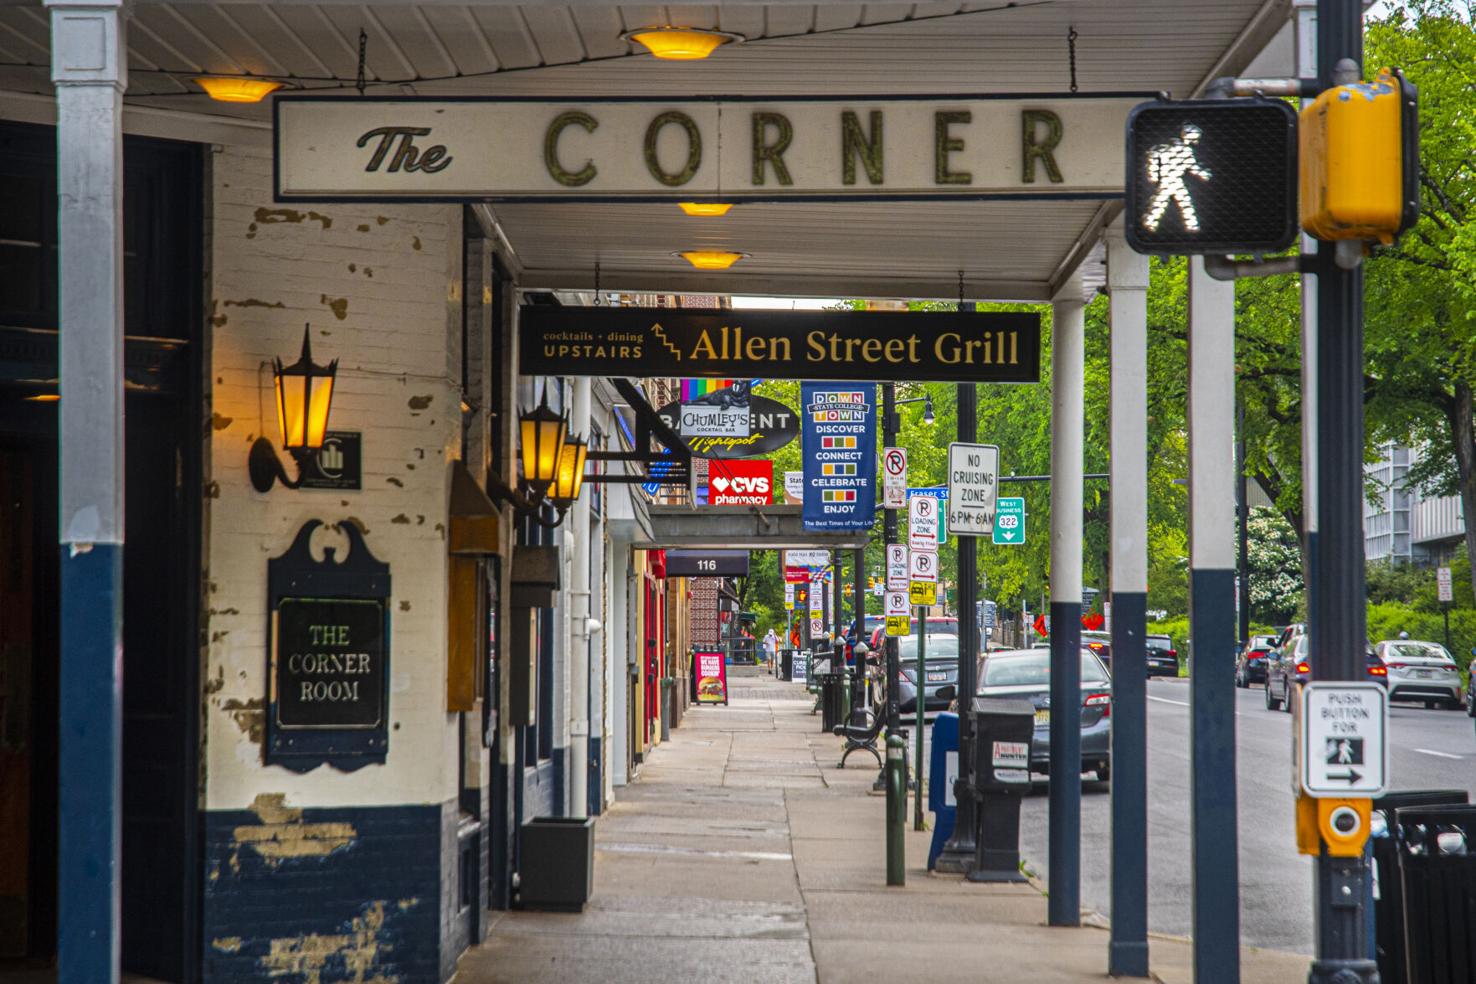 The Corner Room In State College Temporarily Closes For Renovation 4601